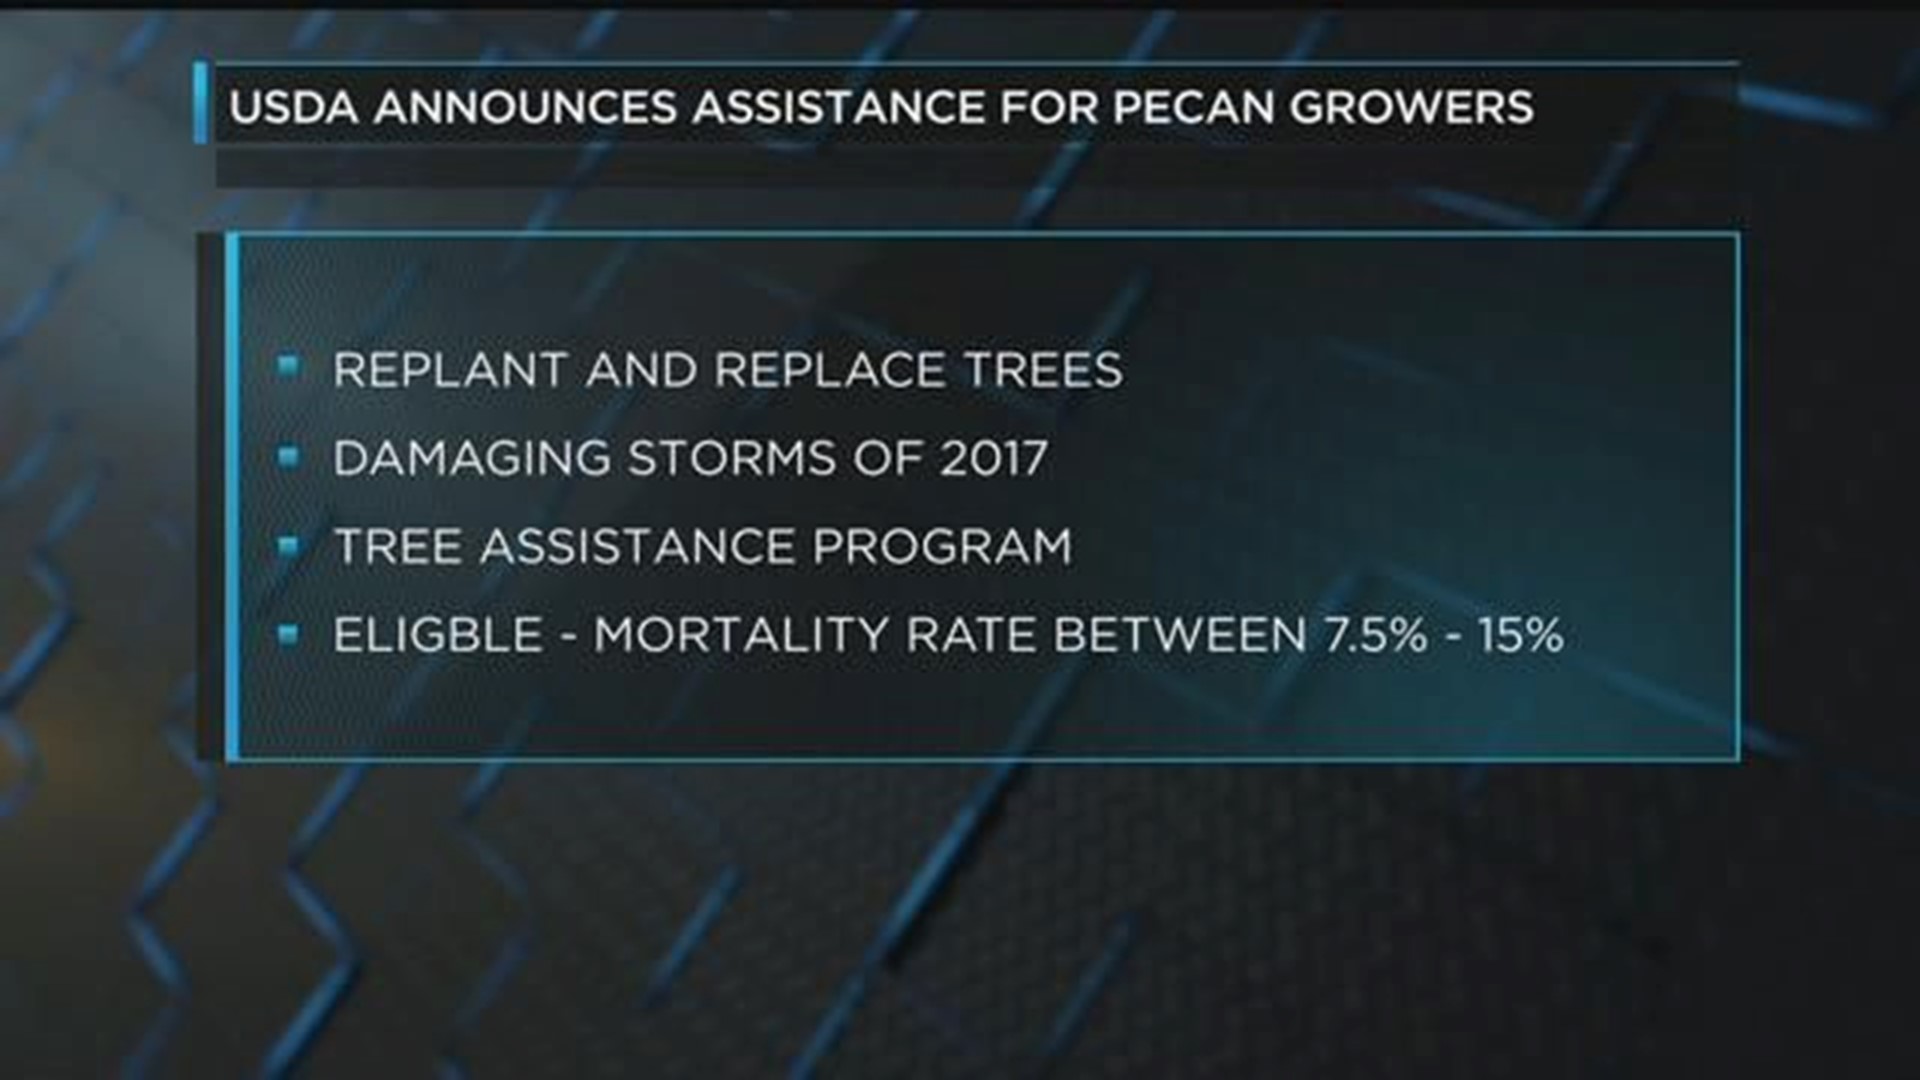 USDA to provide assistance to pecan farmers struggling after 2017 weather events